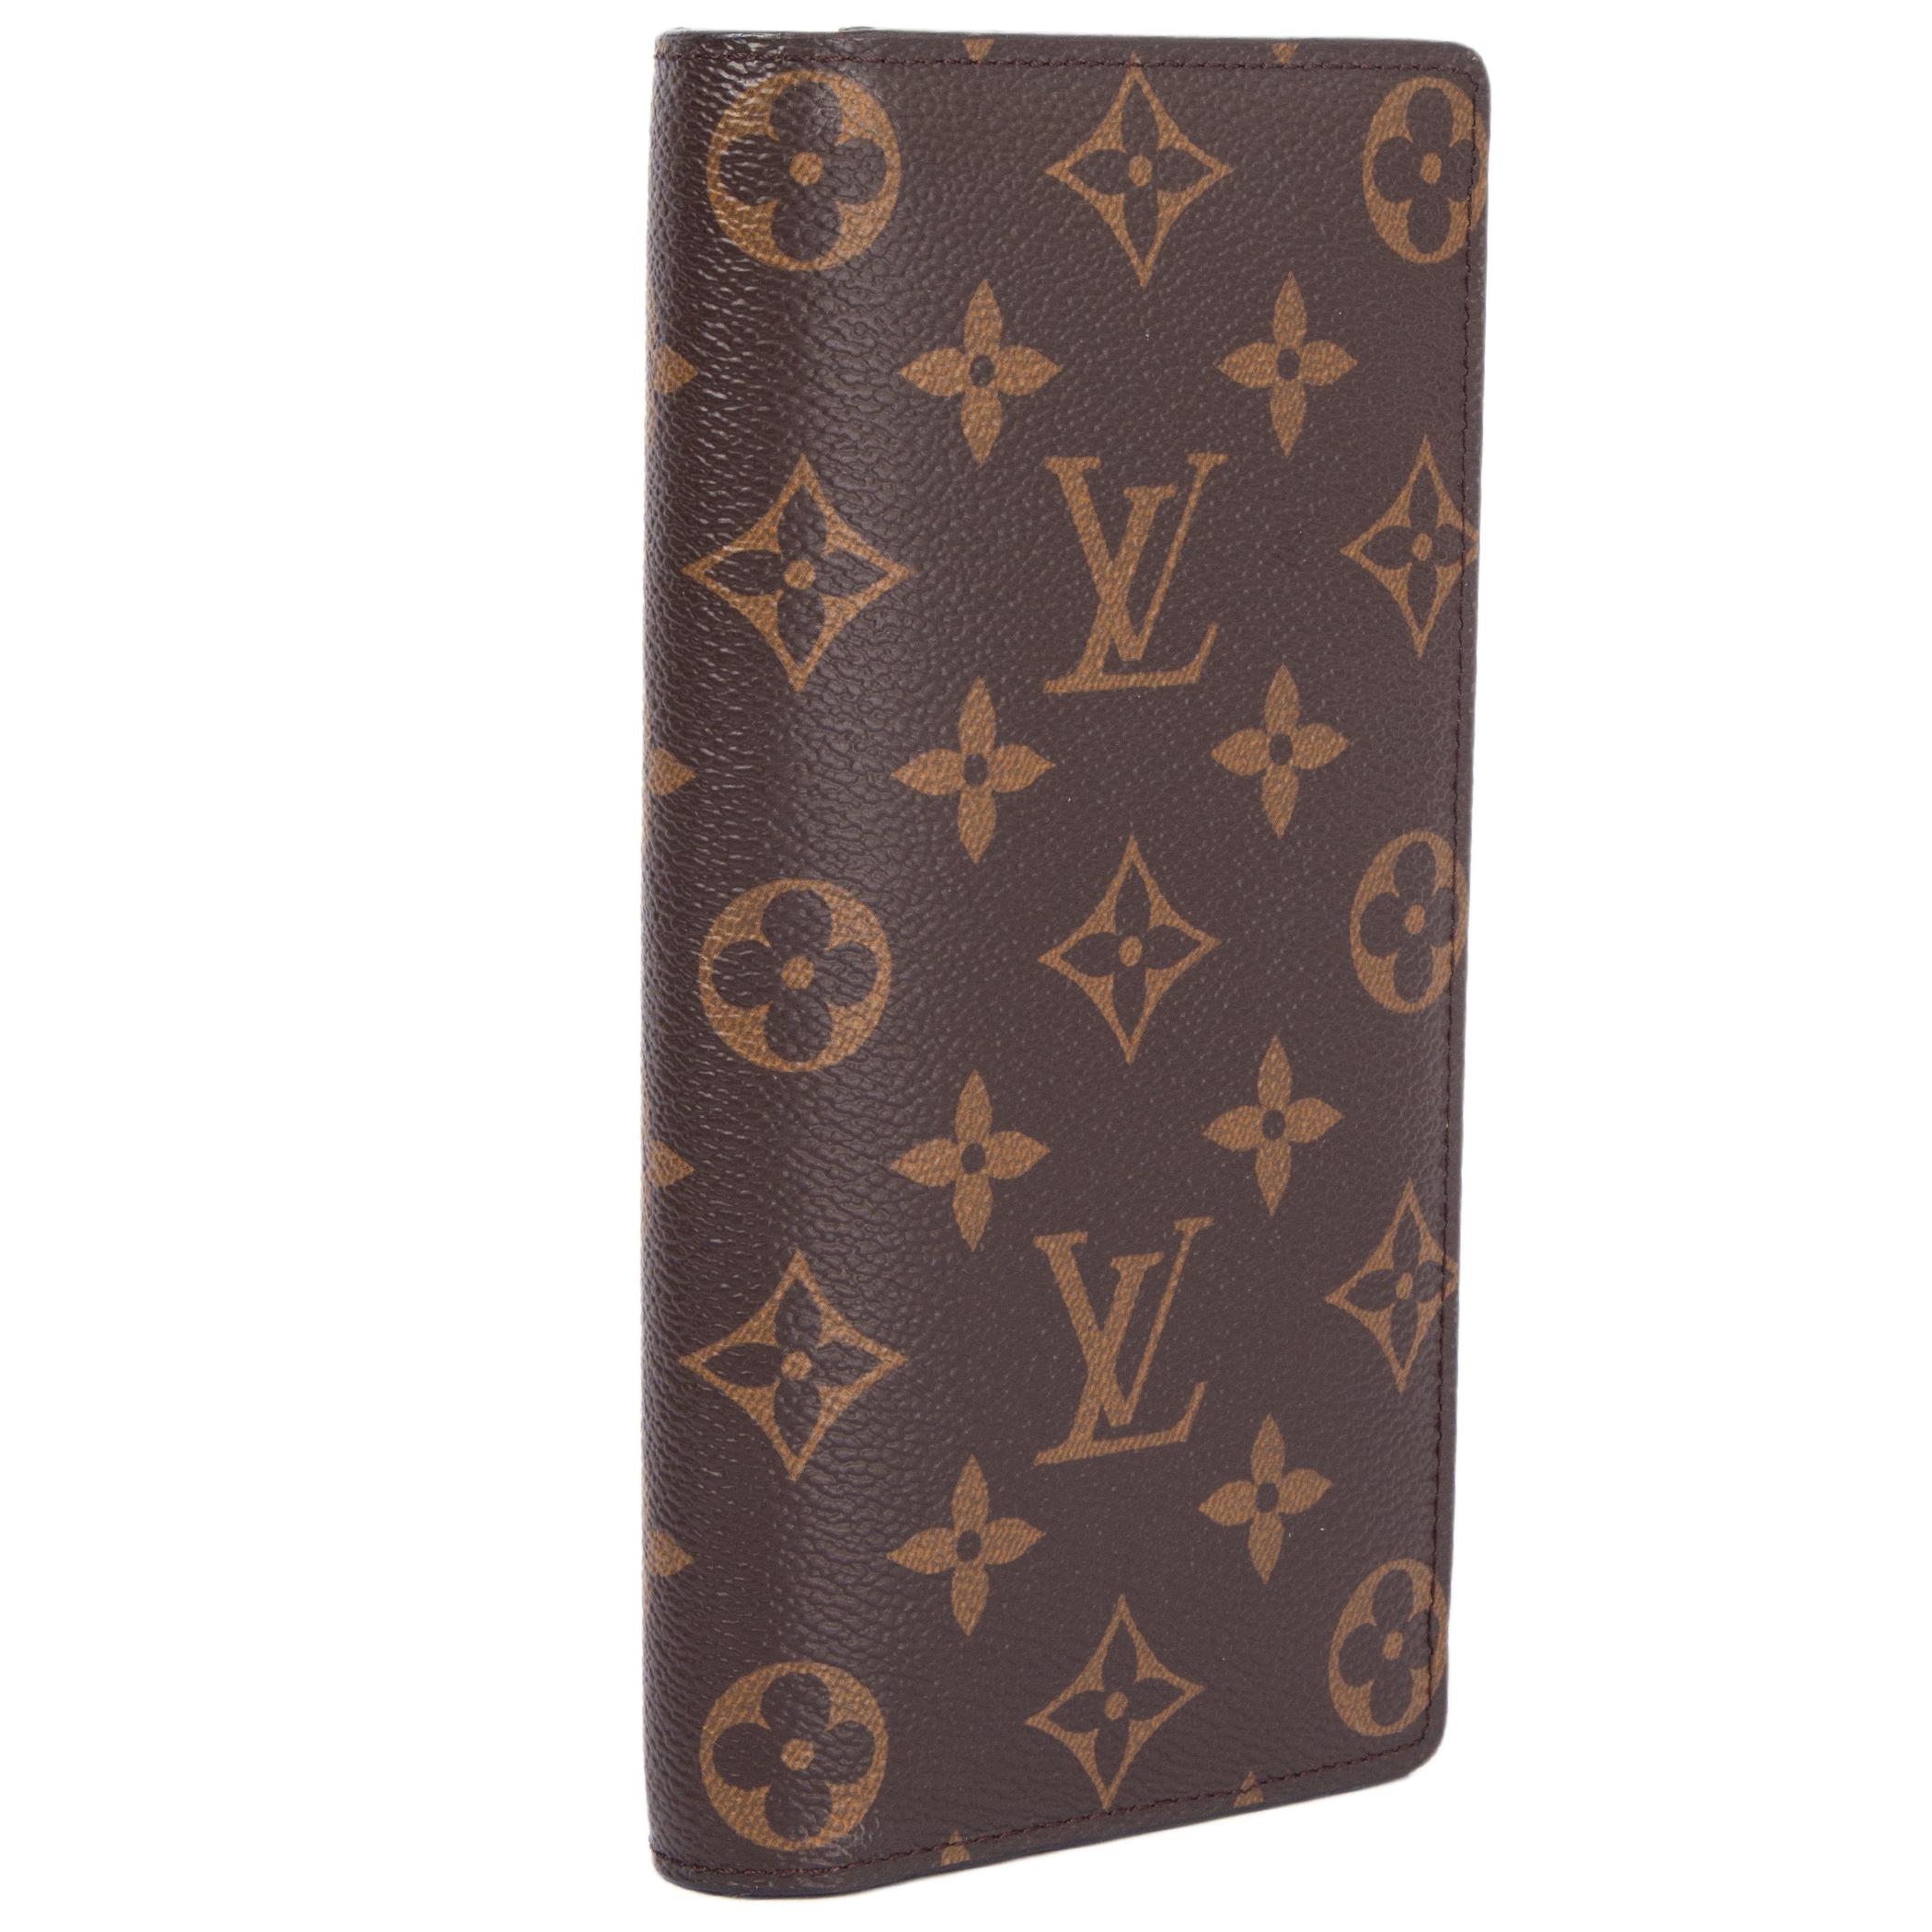 100% authentic Louis Vuitton Brazza wallet in monogram canvas (100%). It features 16 credit card slots plus four billfolds. Has one large zipped compartment for coins and is lined in cognac coated canvas. Has been carried and is in excellent